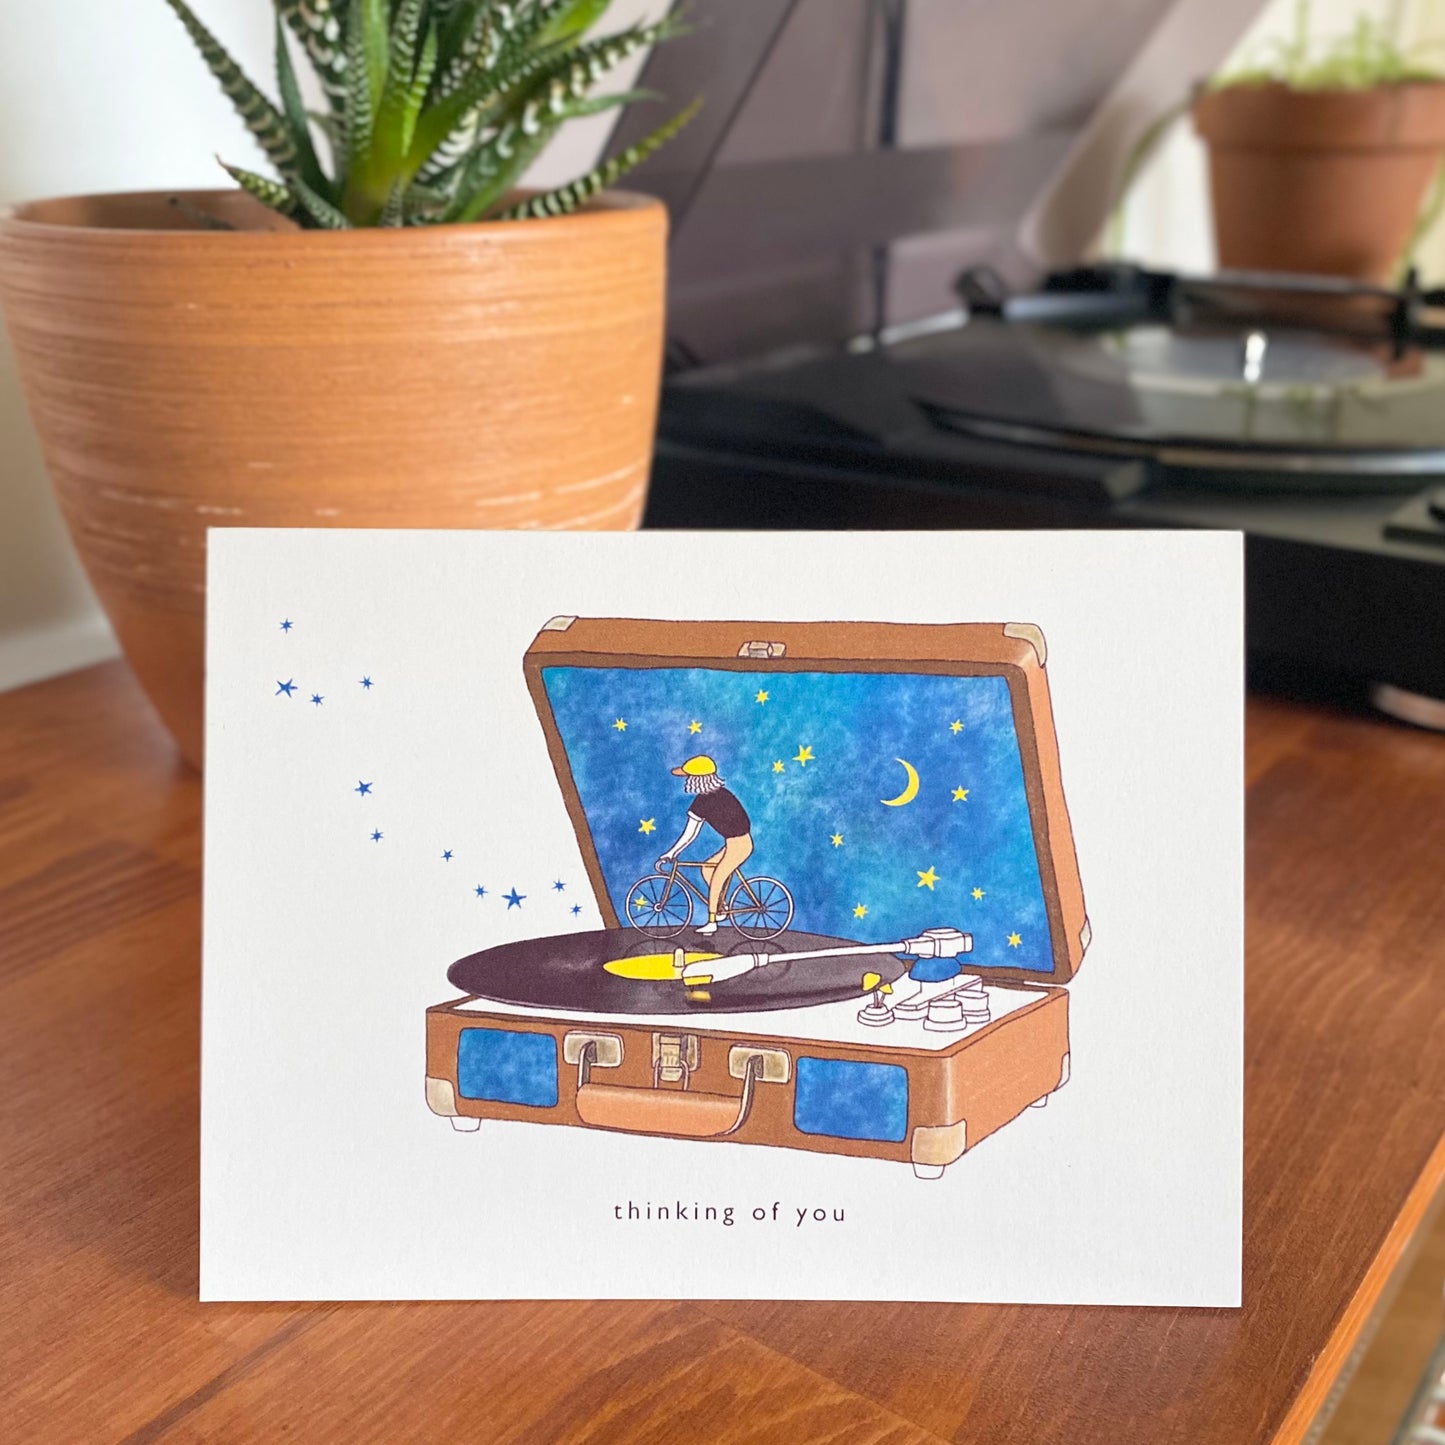 Thinking of You Card with a man with a hat riding a bike on a vinyl record player